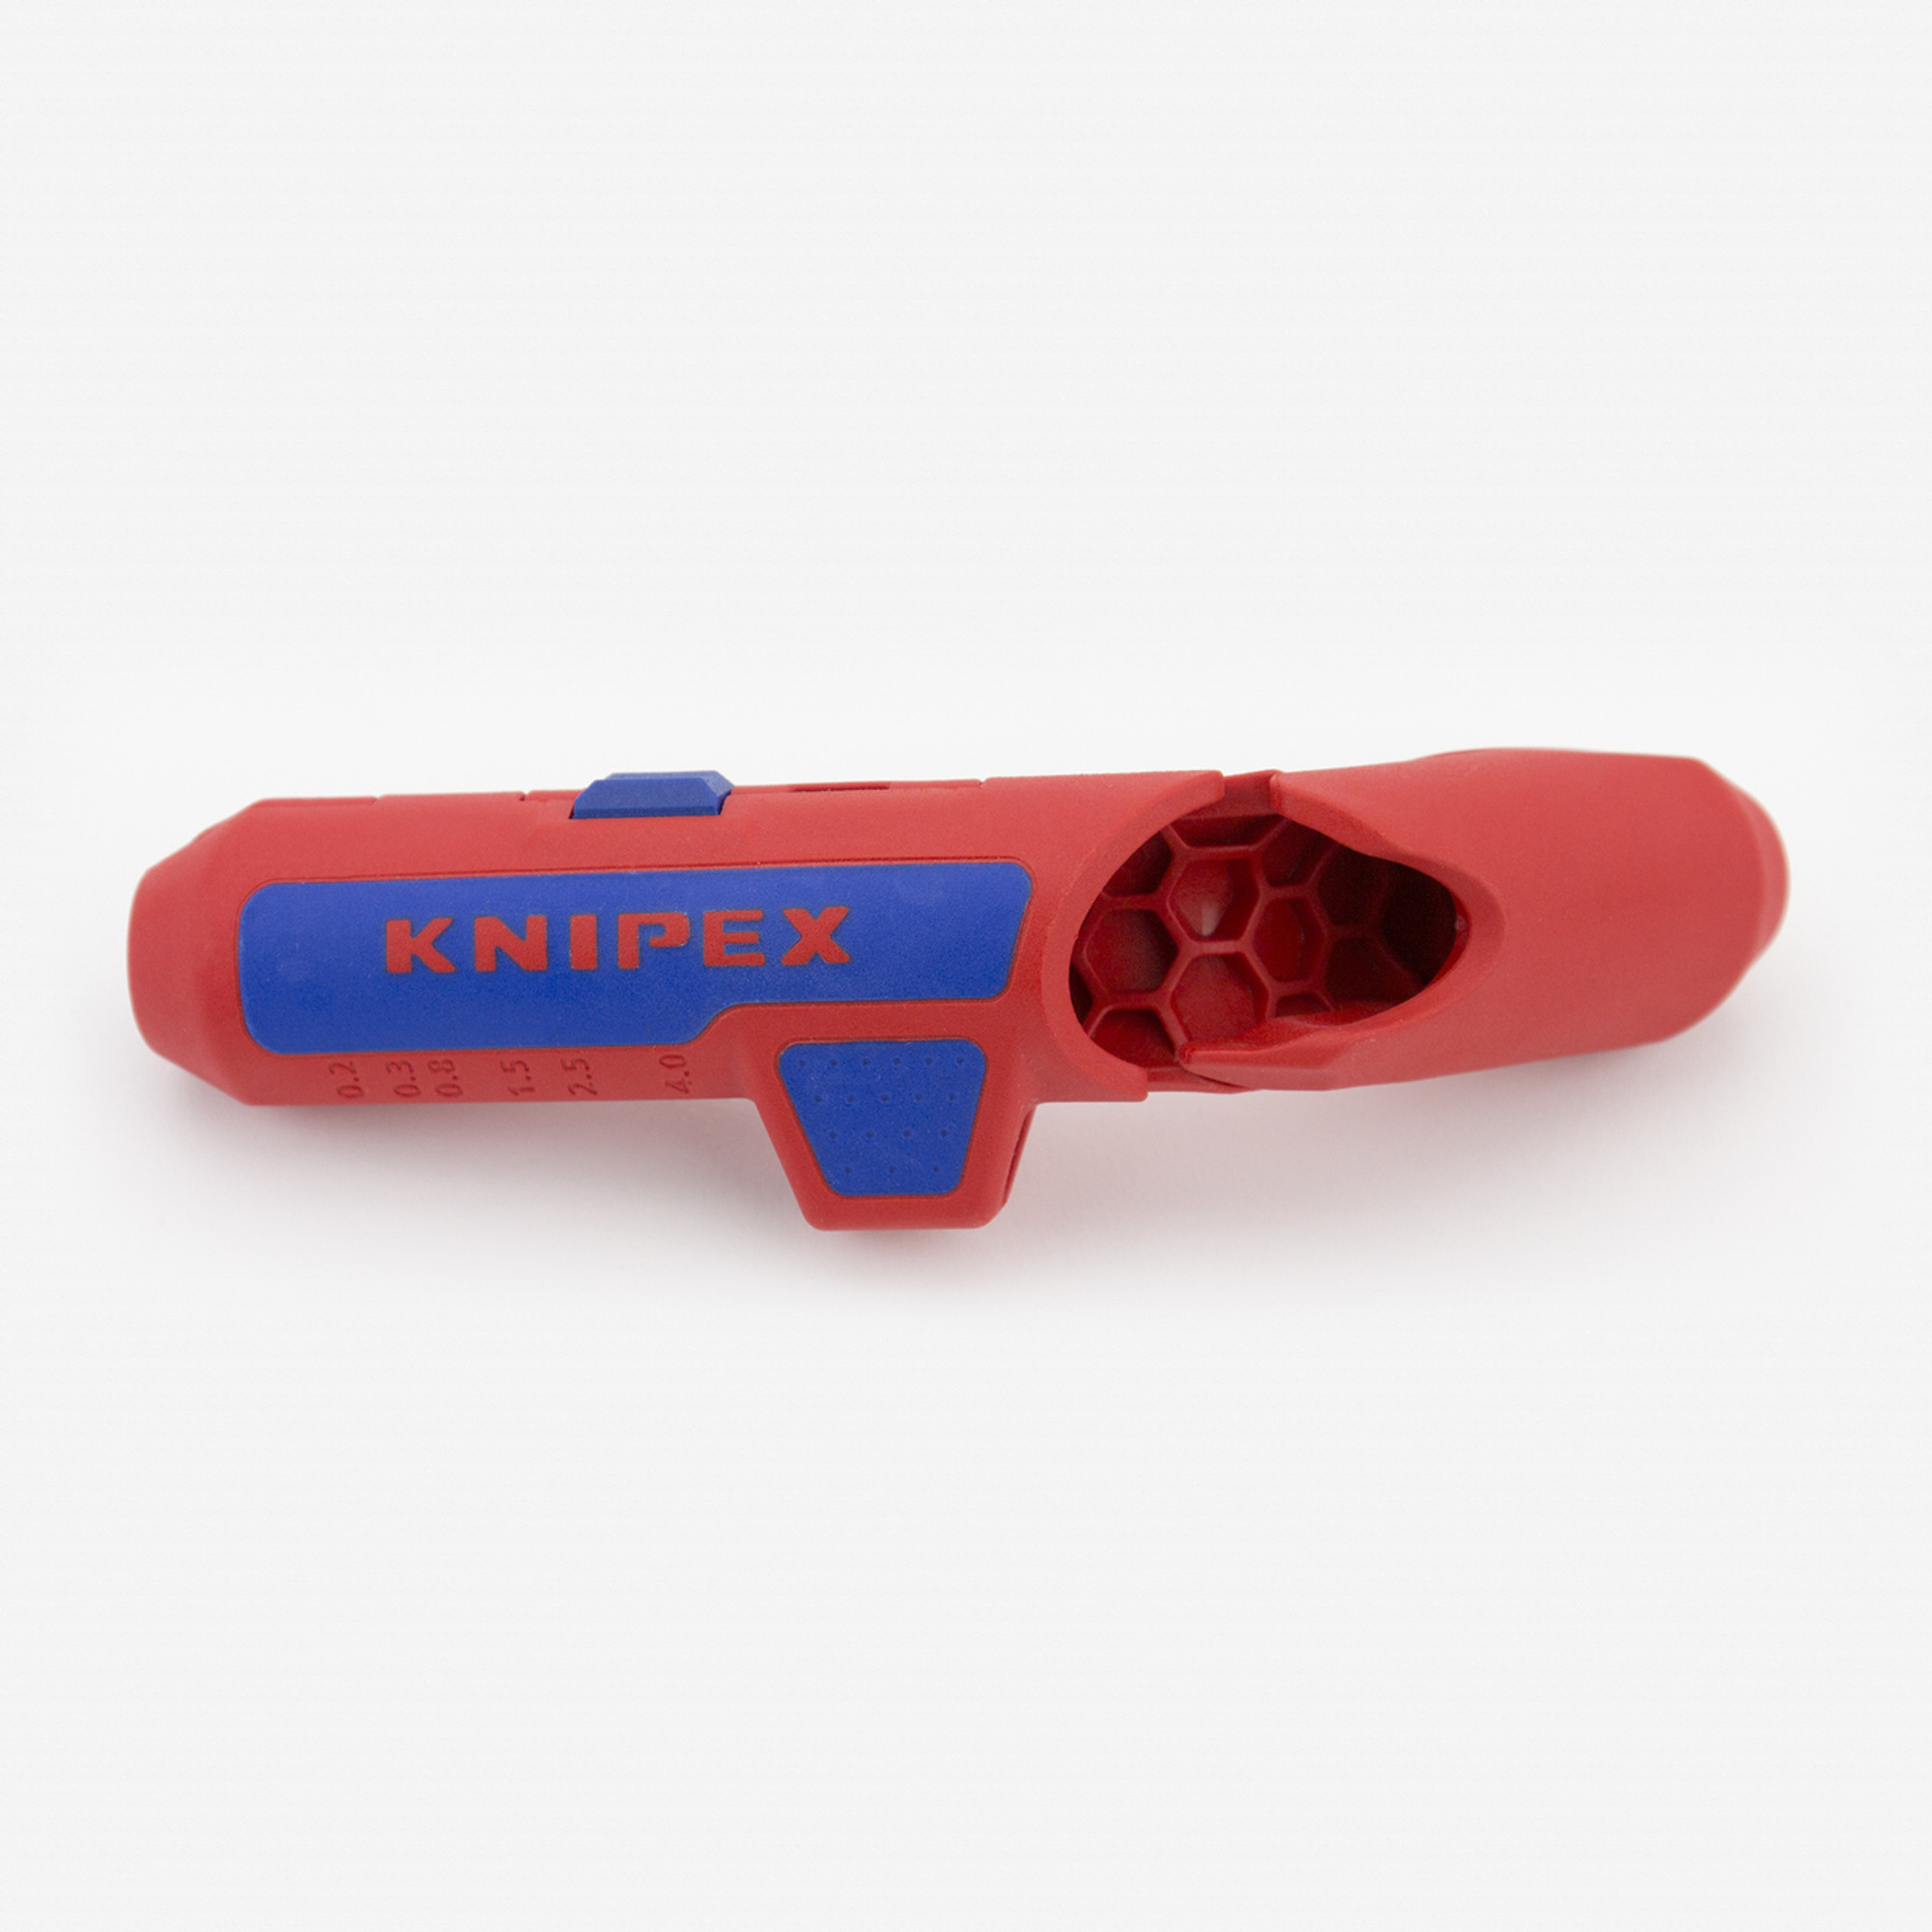 Knipex ErgoStrip Universal Tool - Metric Wire Sizes